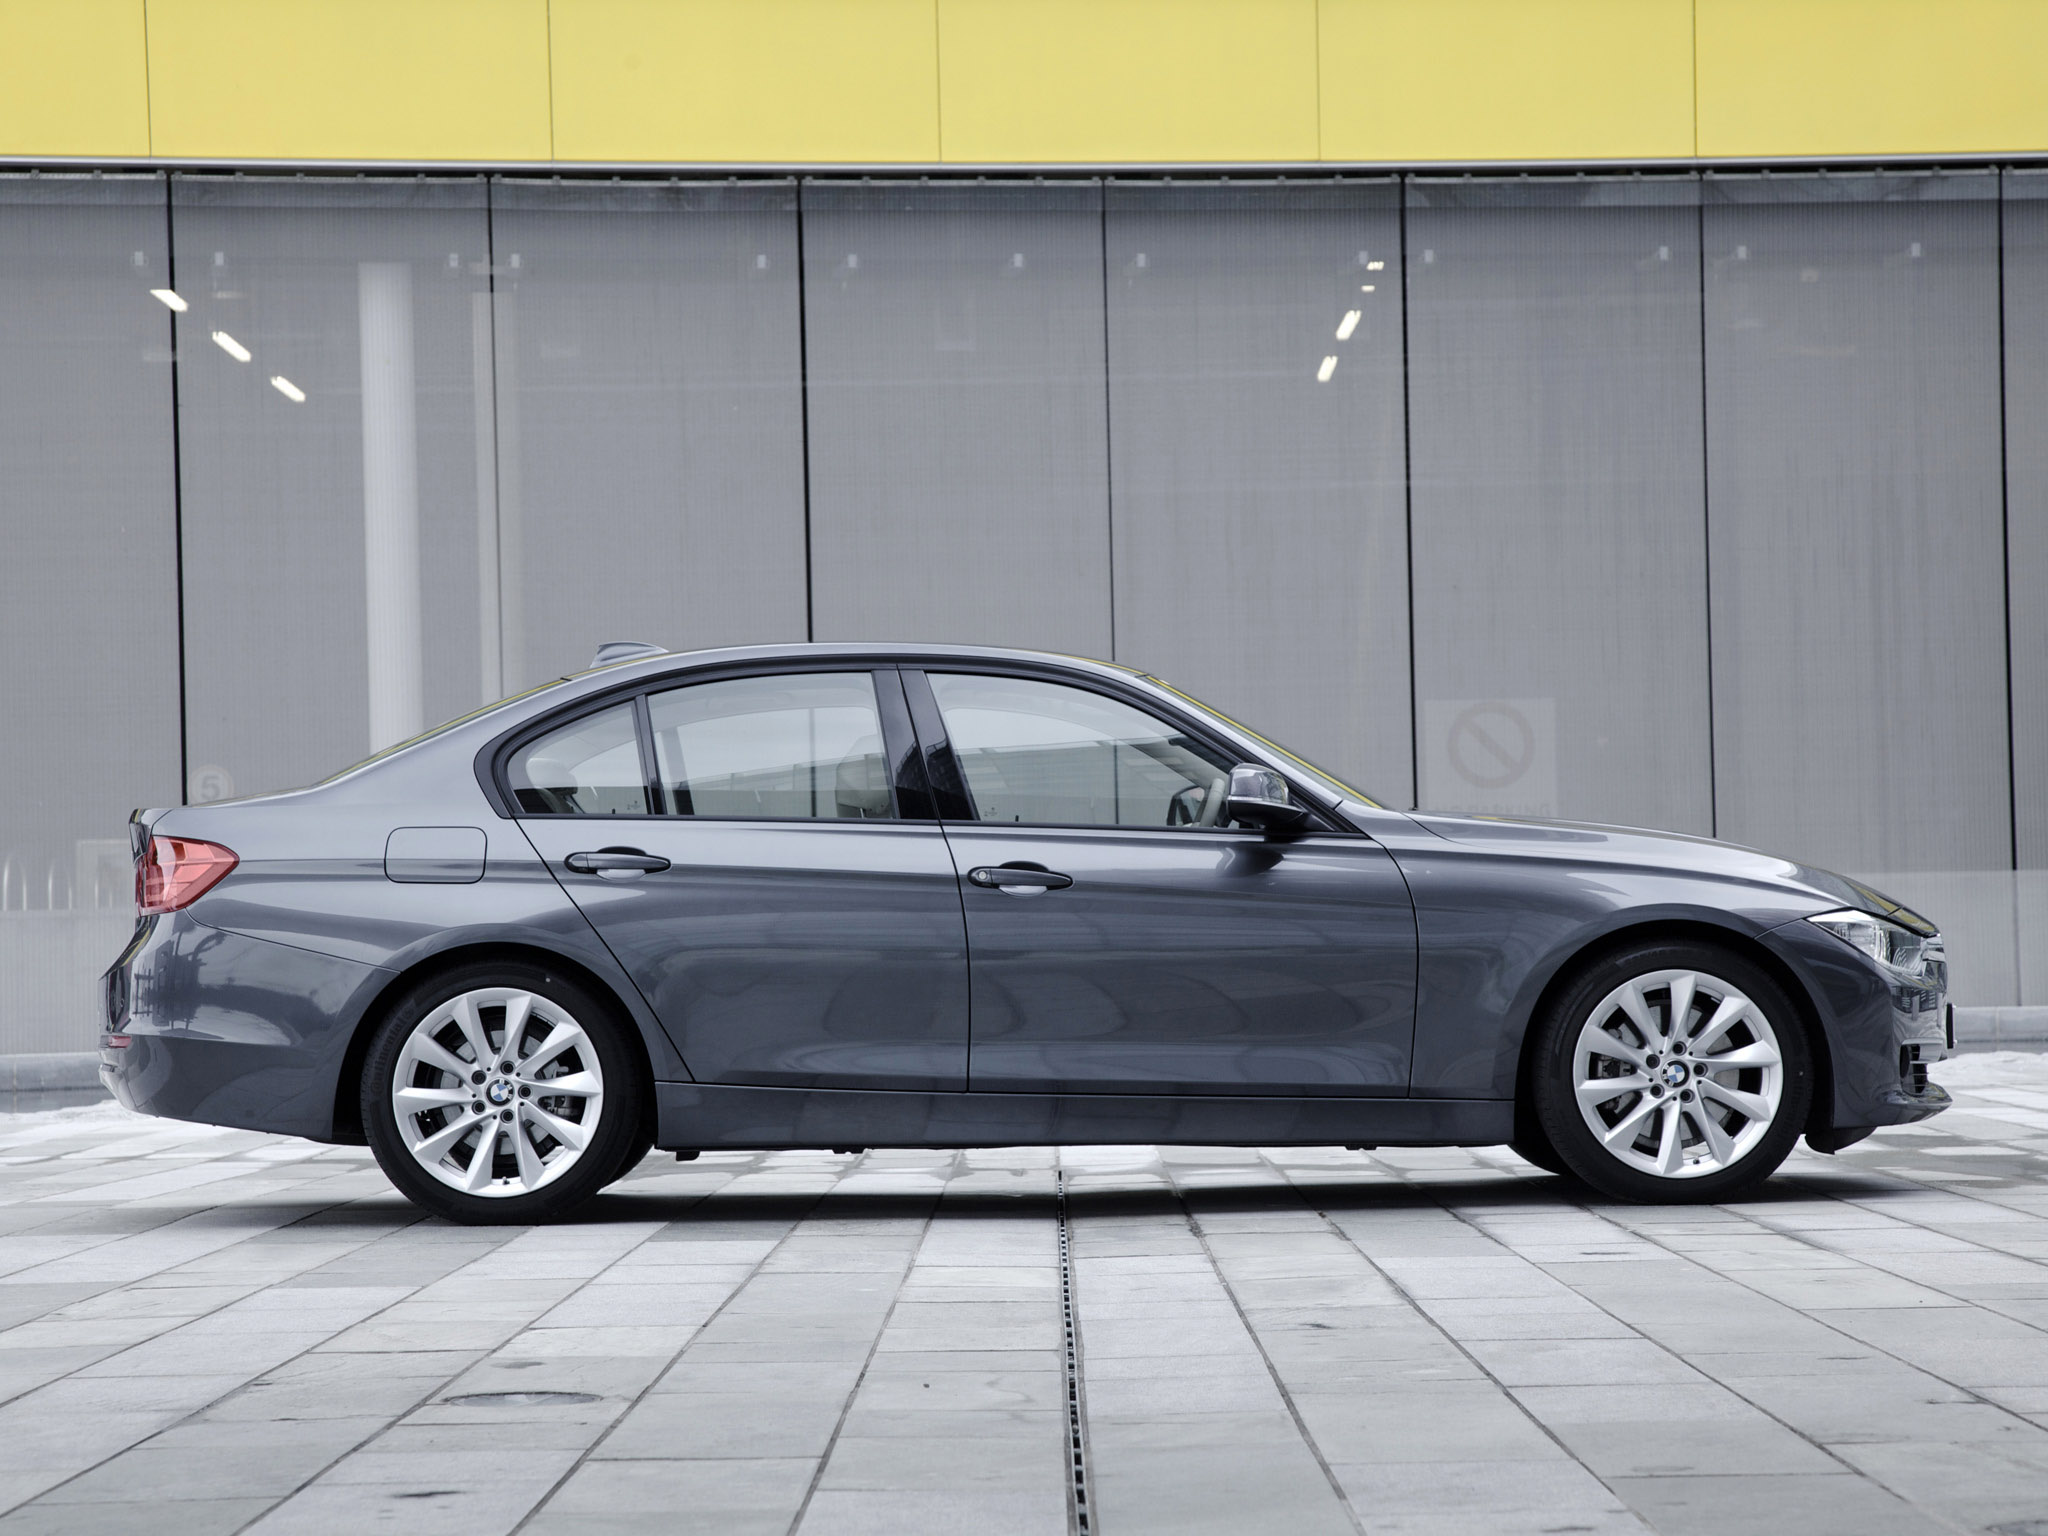 Car in pictures car photo gallery » BMW 3Series 328i